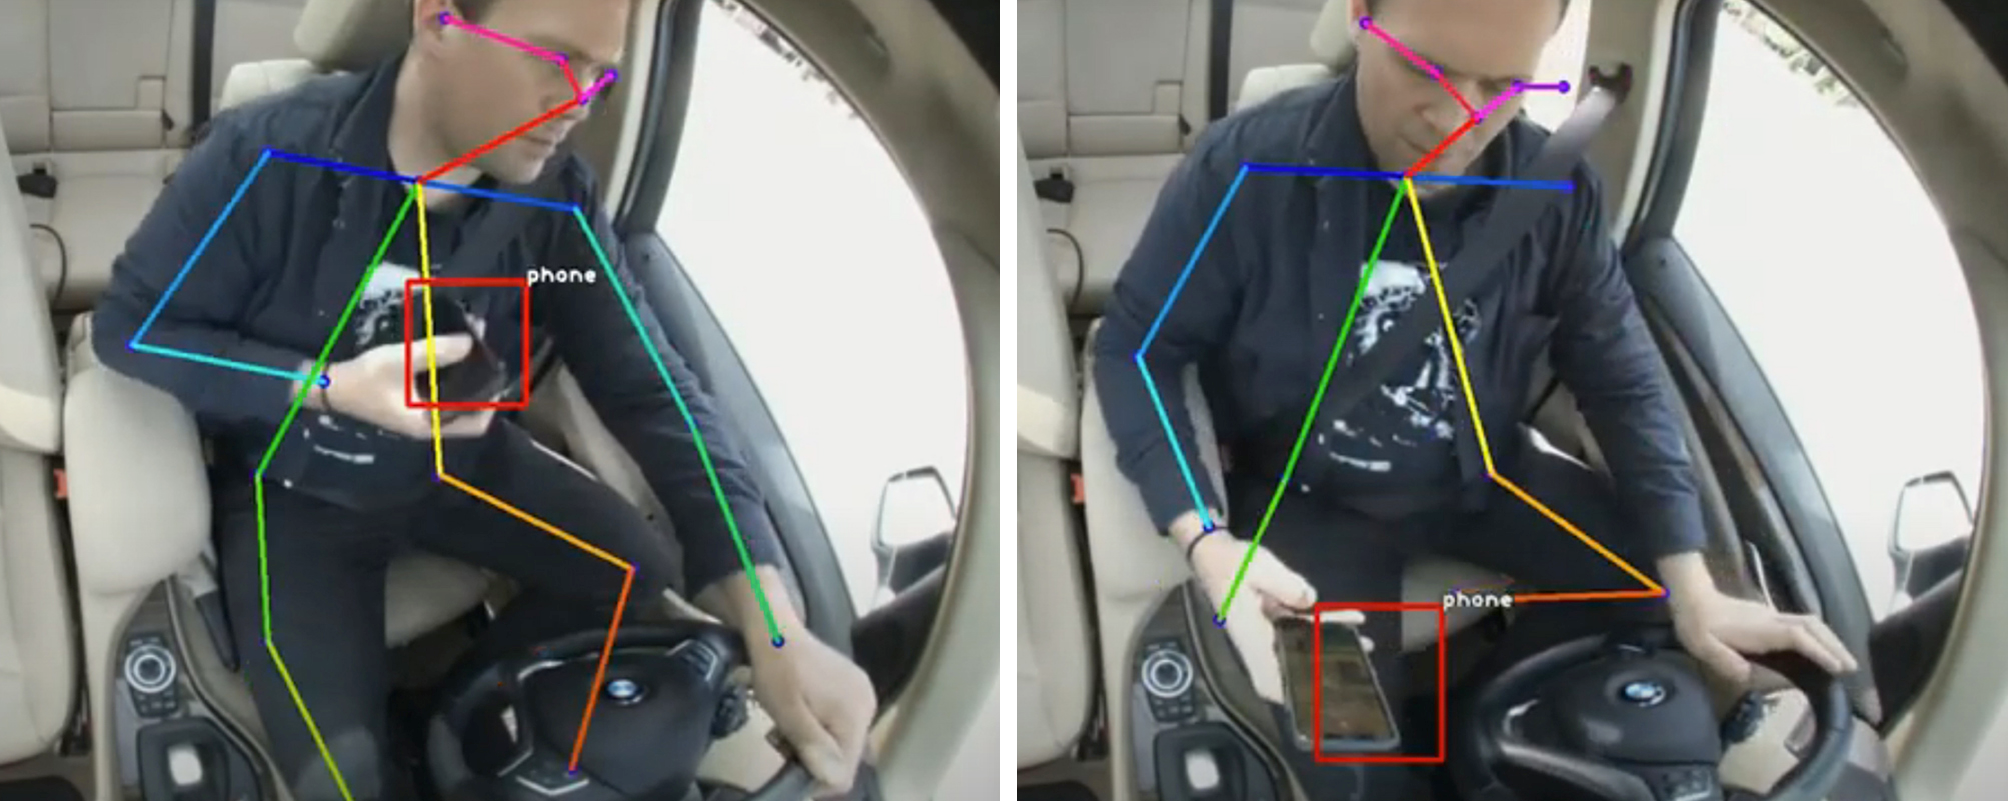 Colored lines over a person sitting in a car and holding a phone in their hand.  